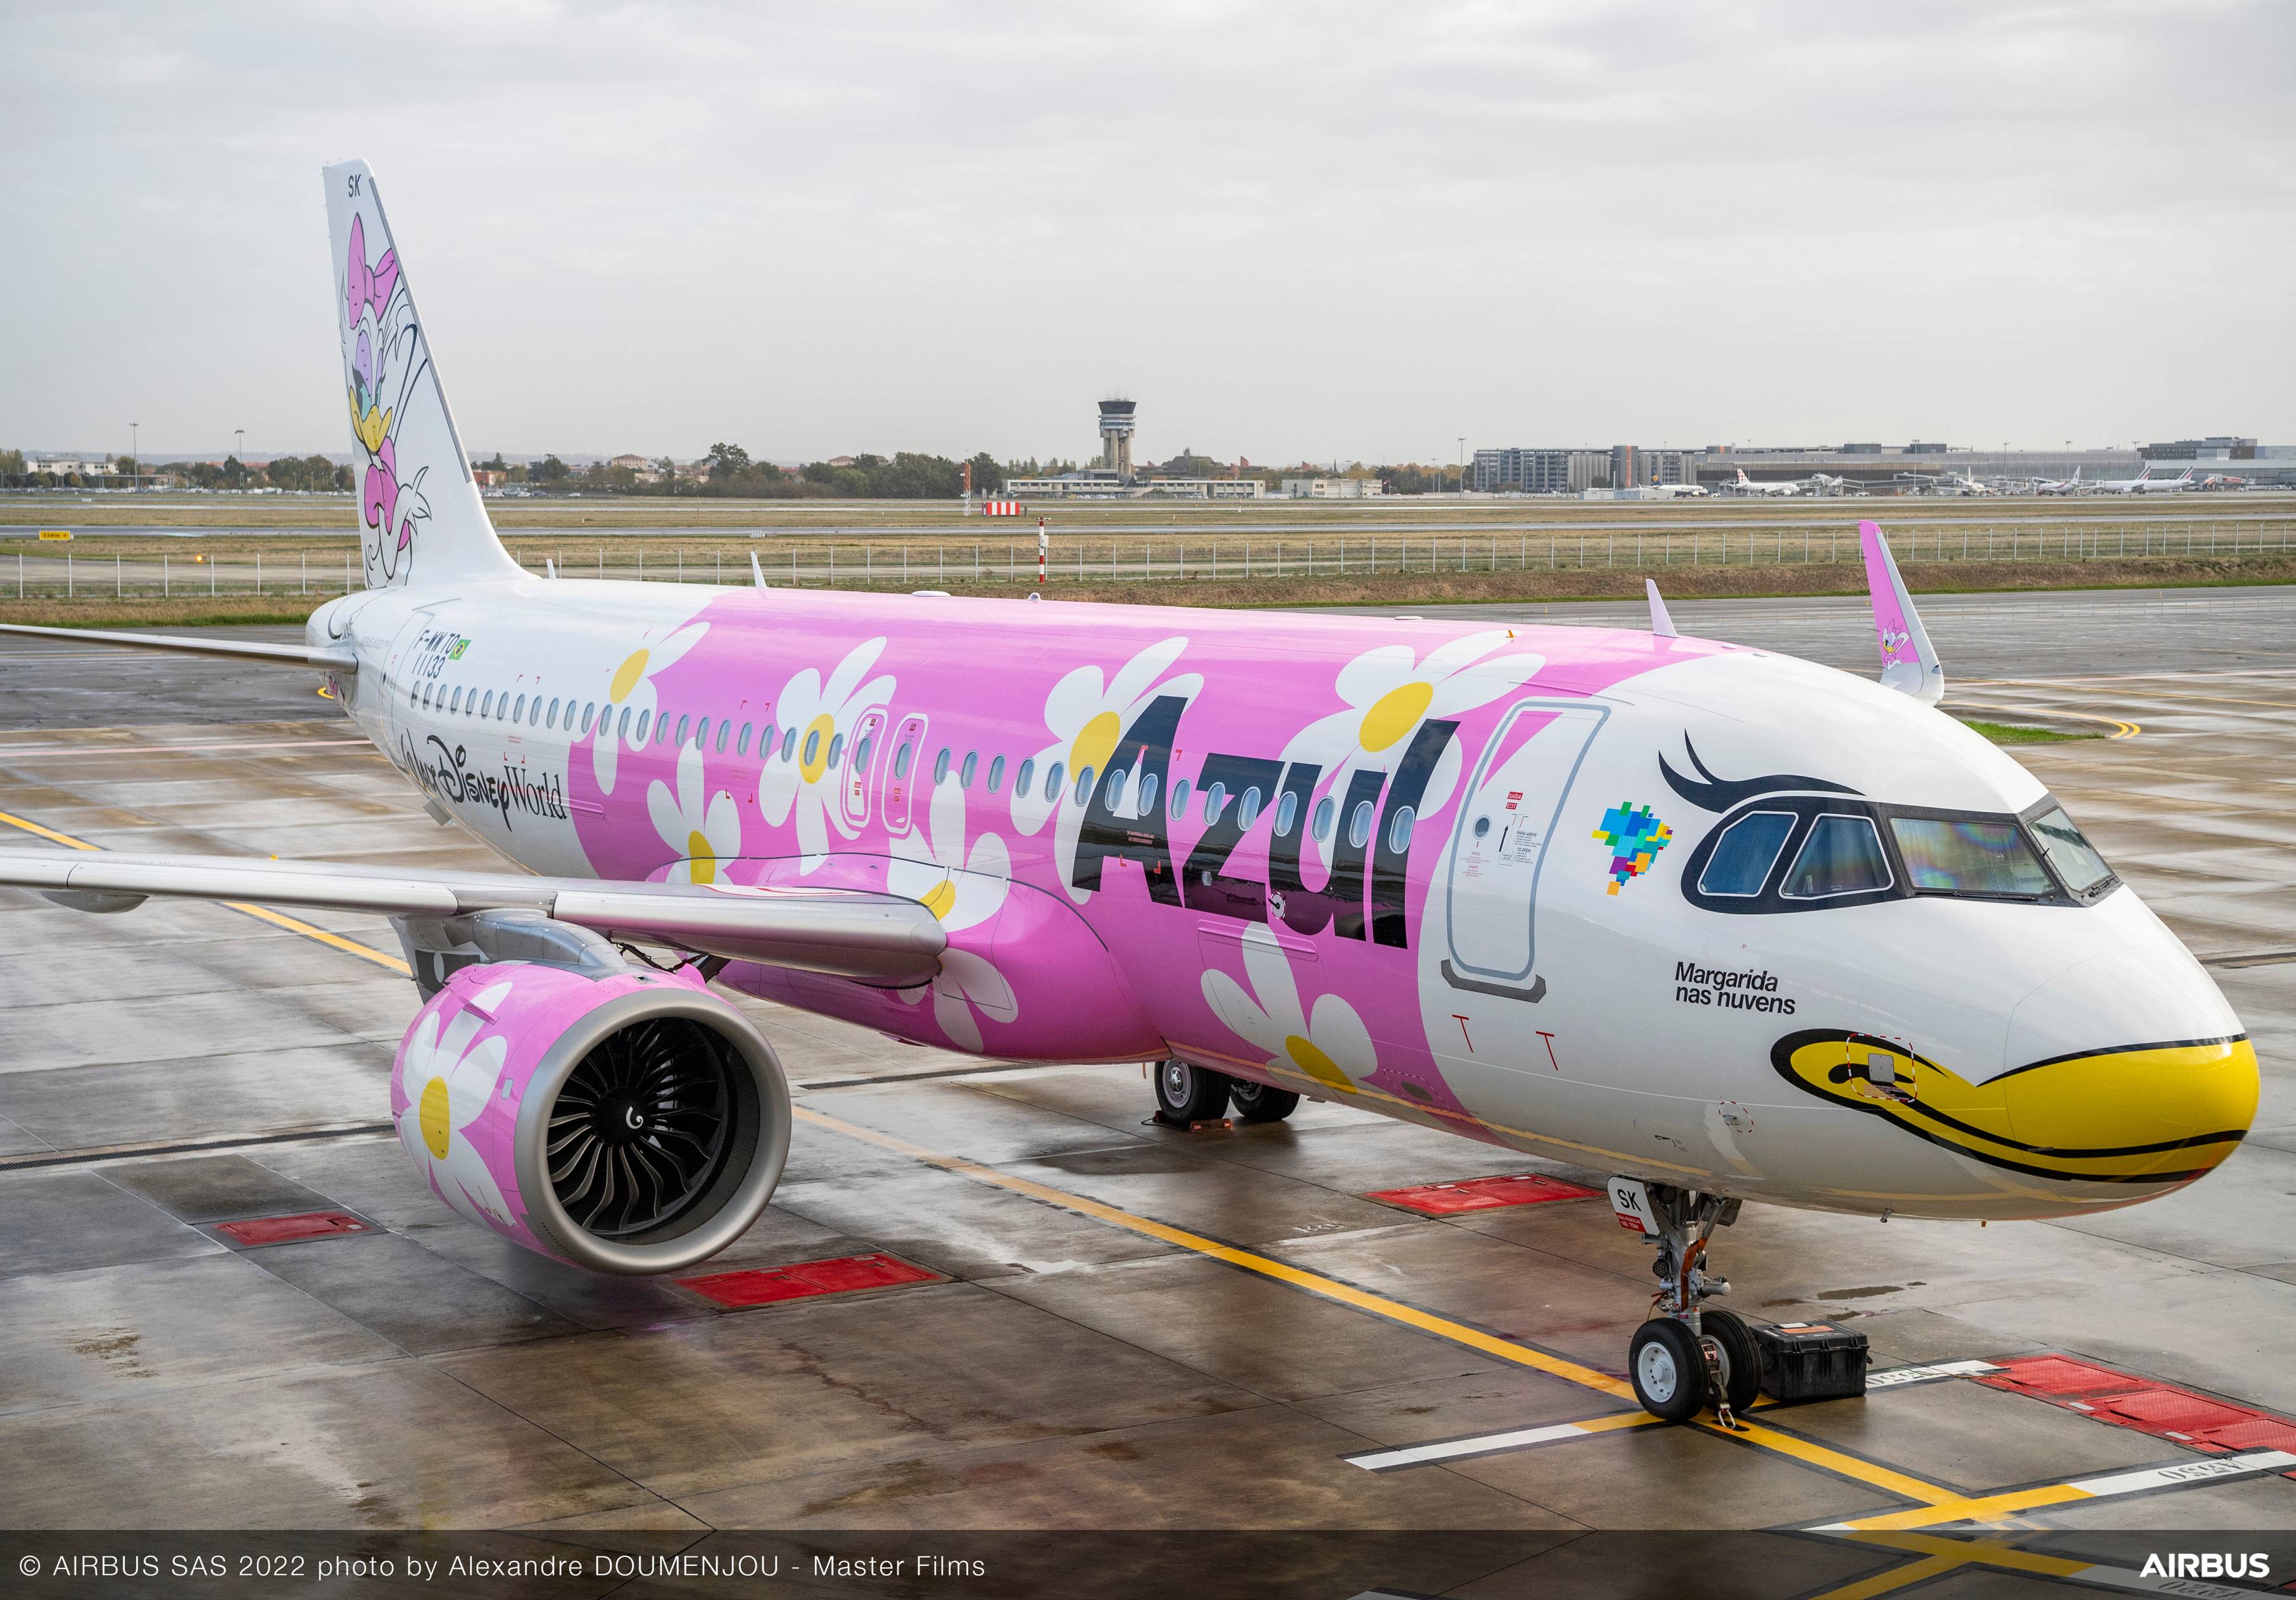 Airbus unveils Walt Disney World livery for new A320 delivered to Brazilian airline Azul